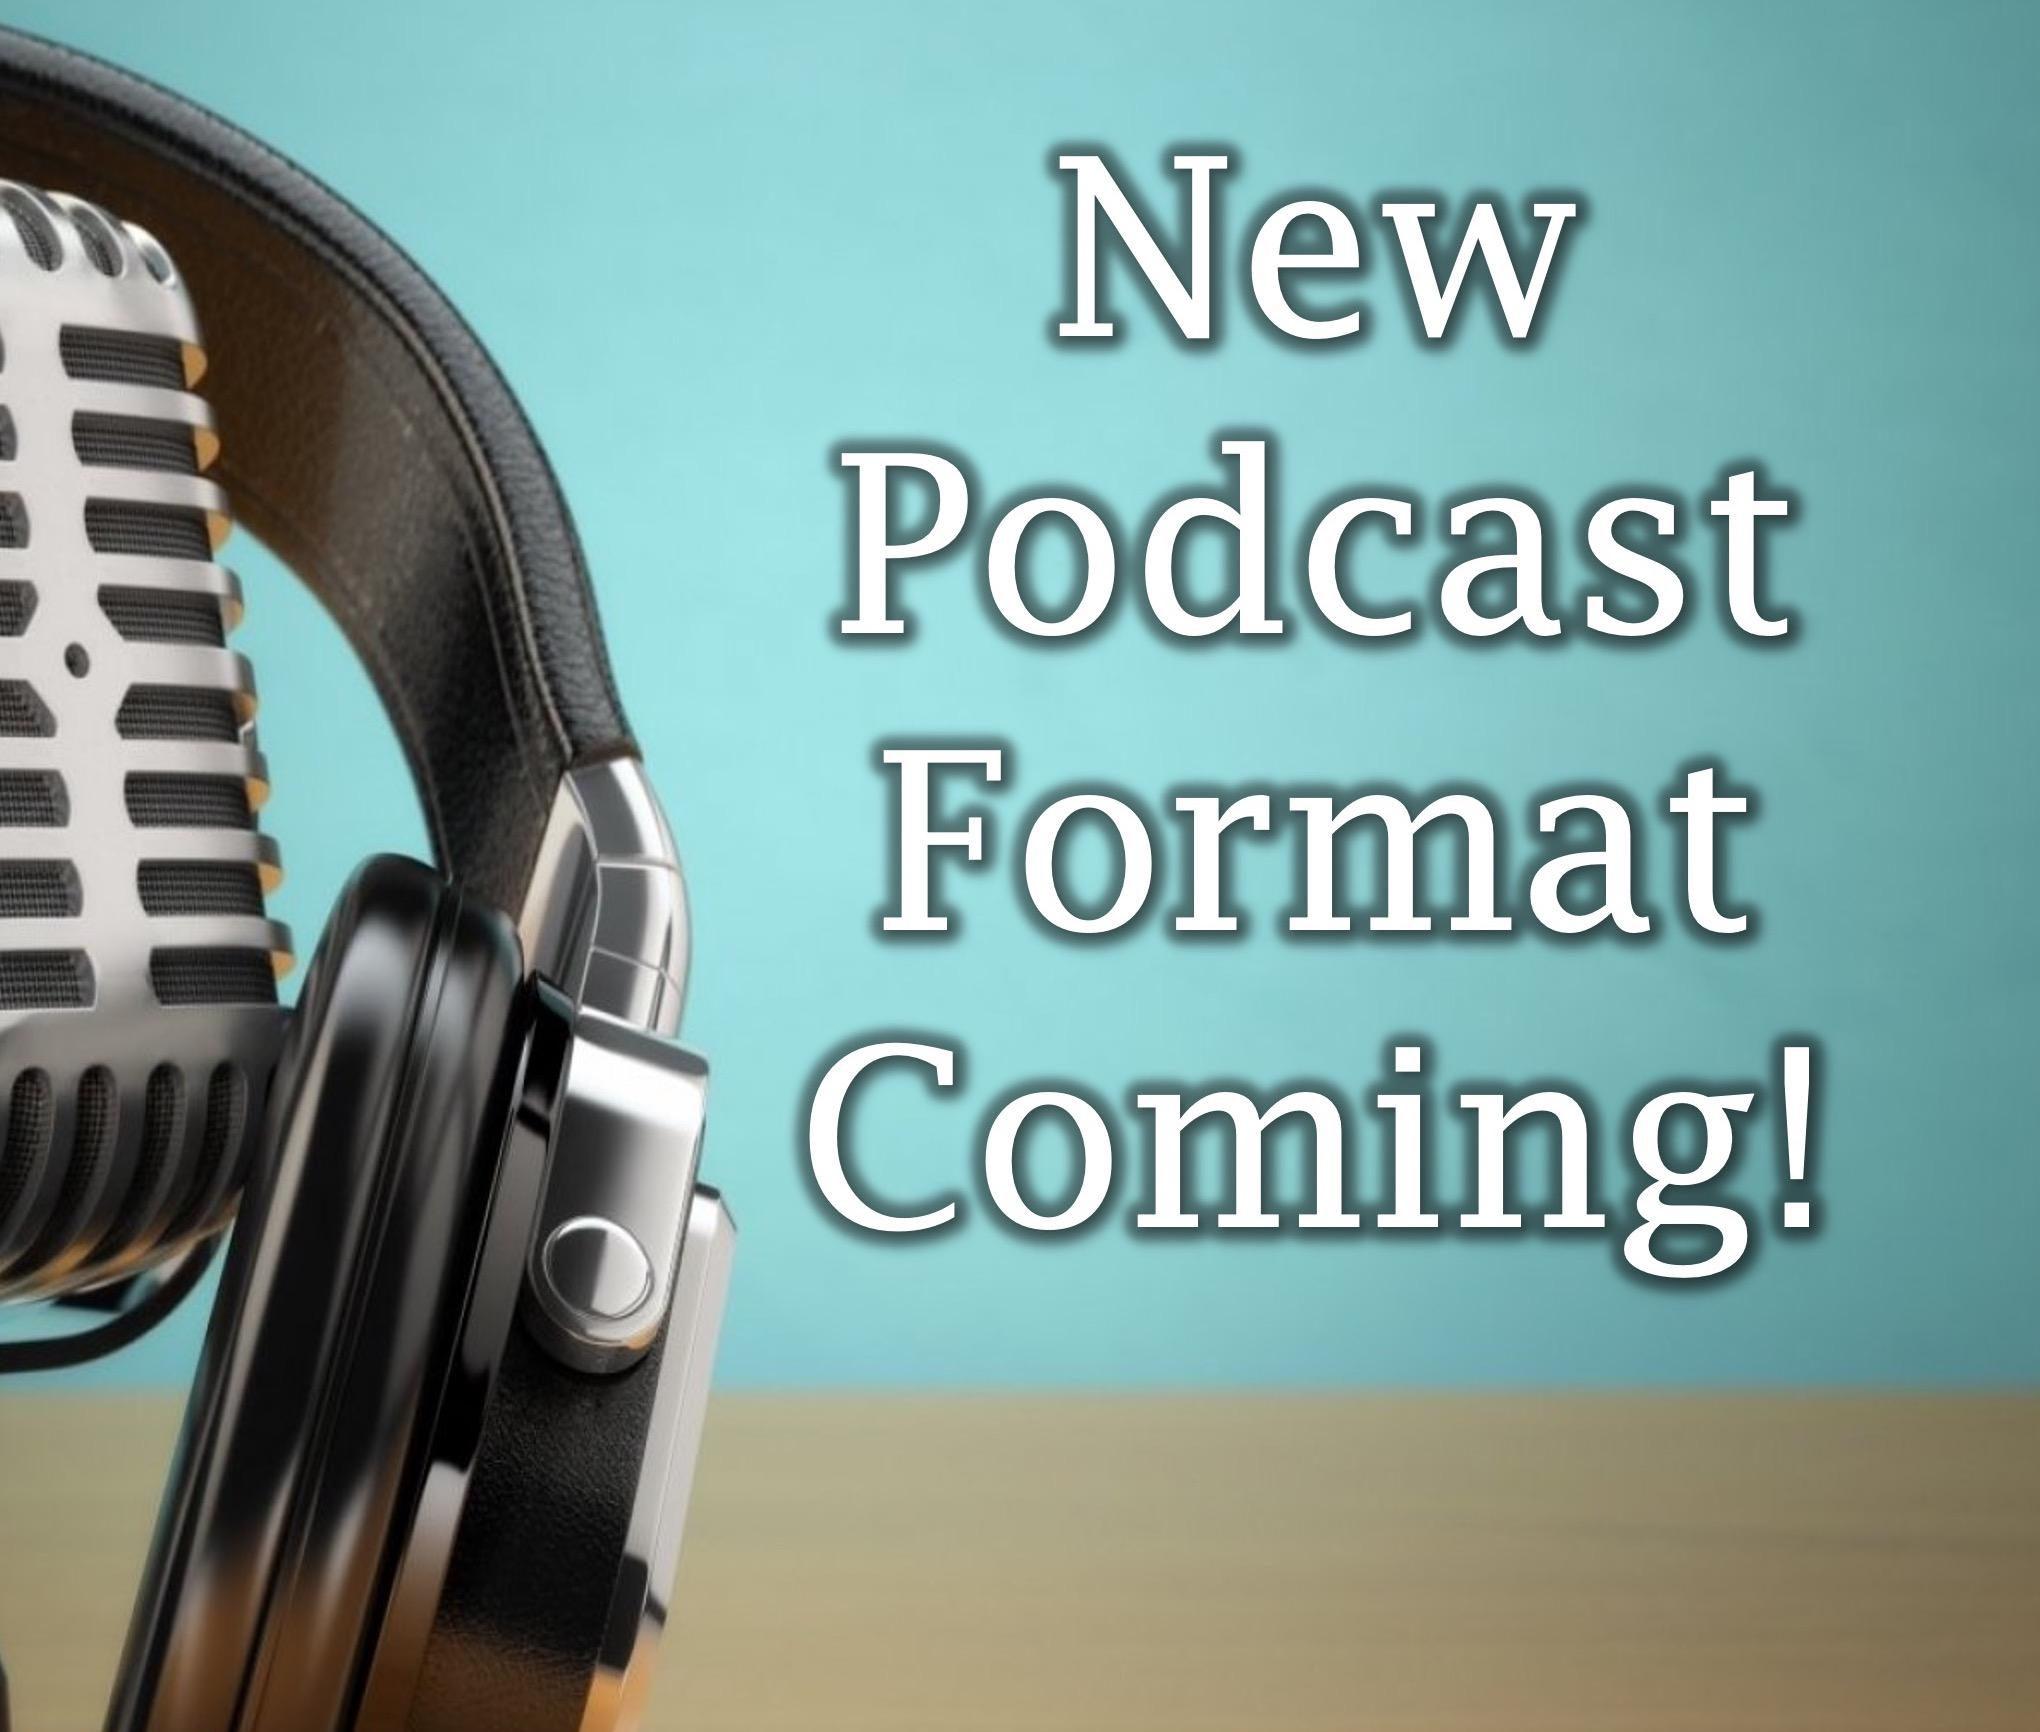 New Podcast Format Coming!